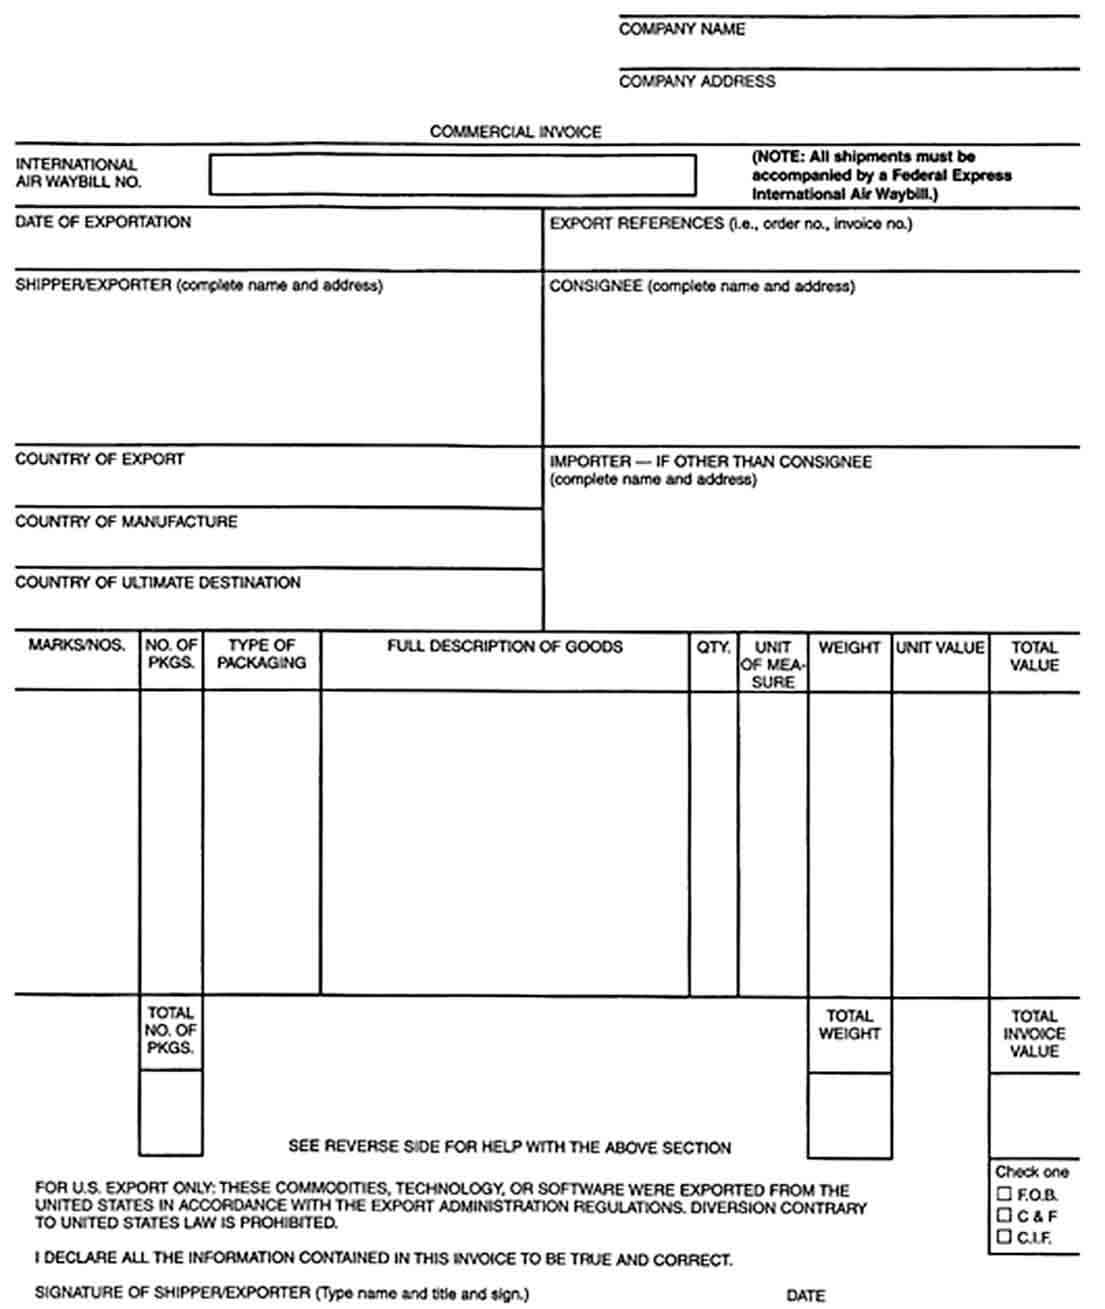 Commercial Invoice Receipt Template